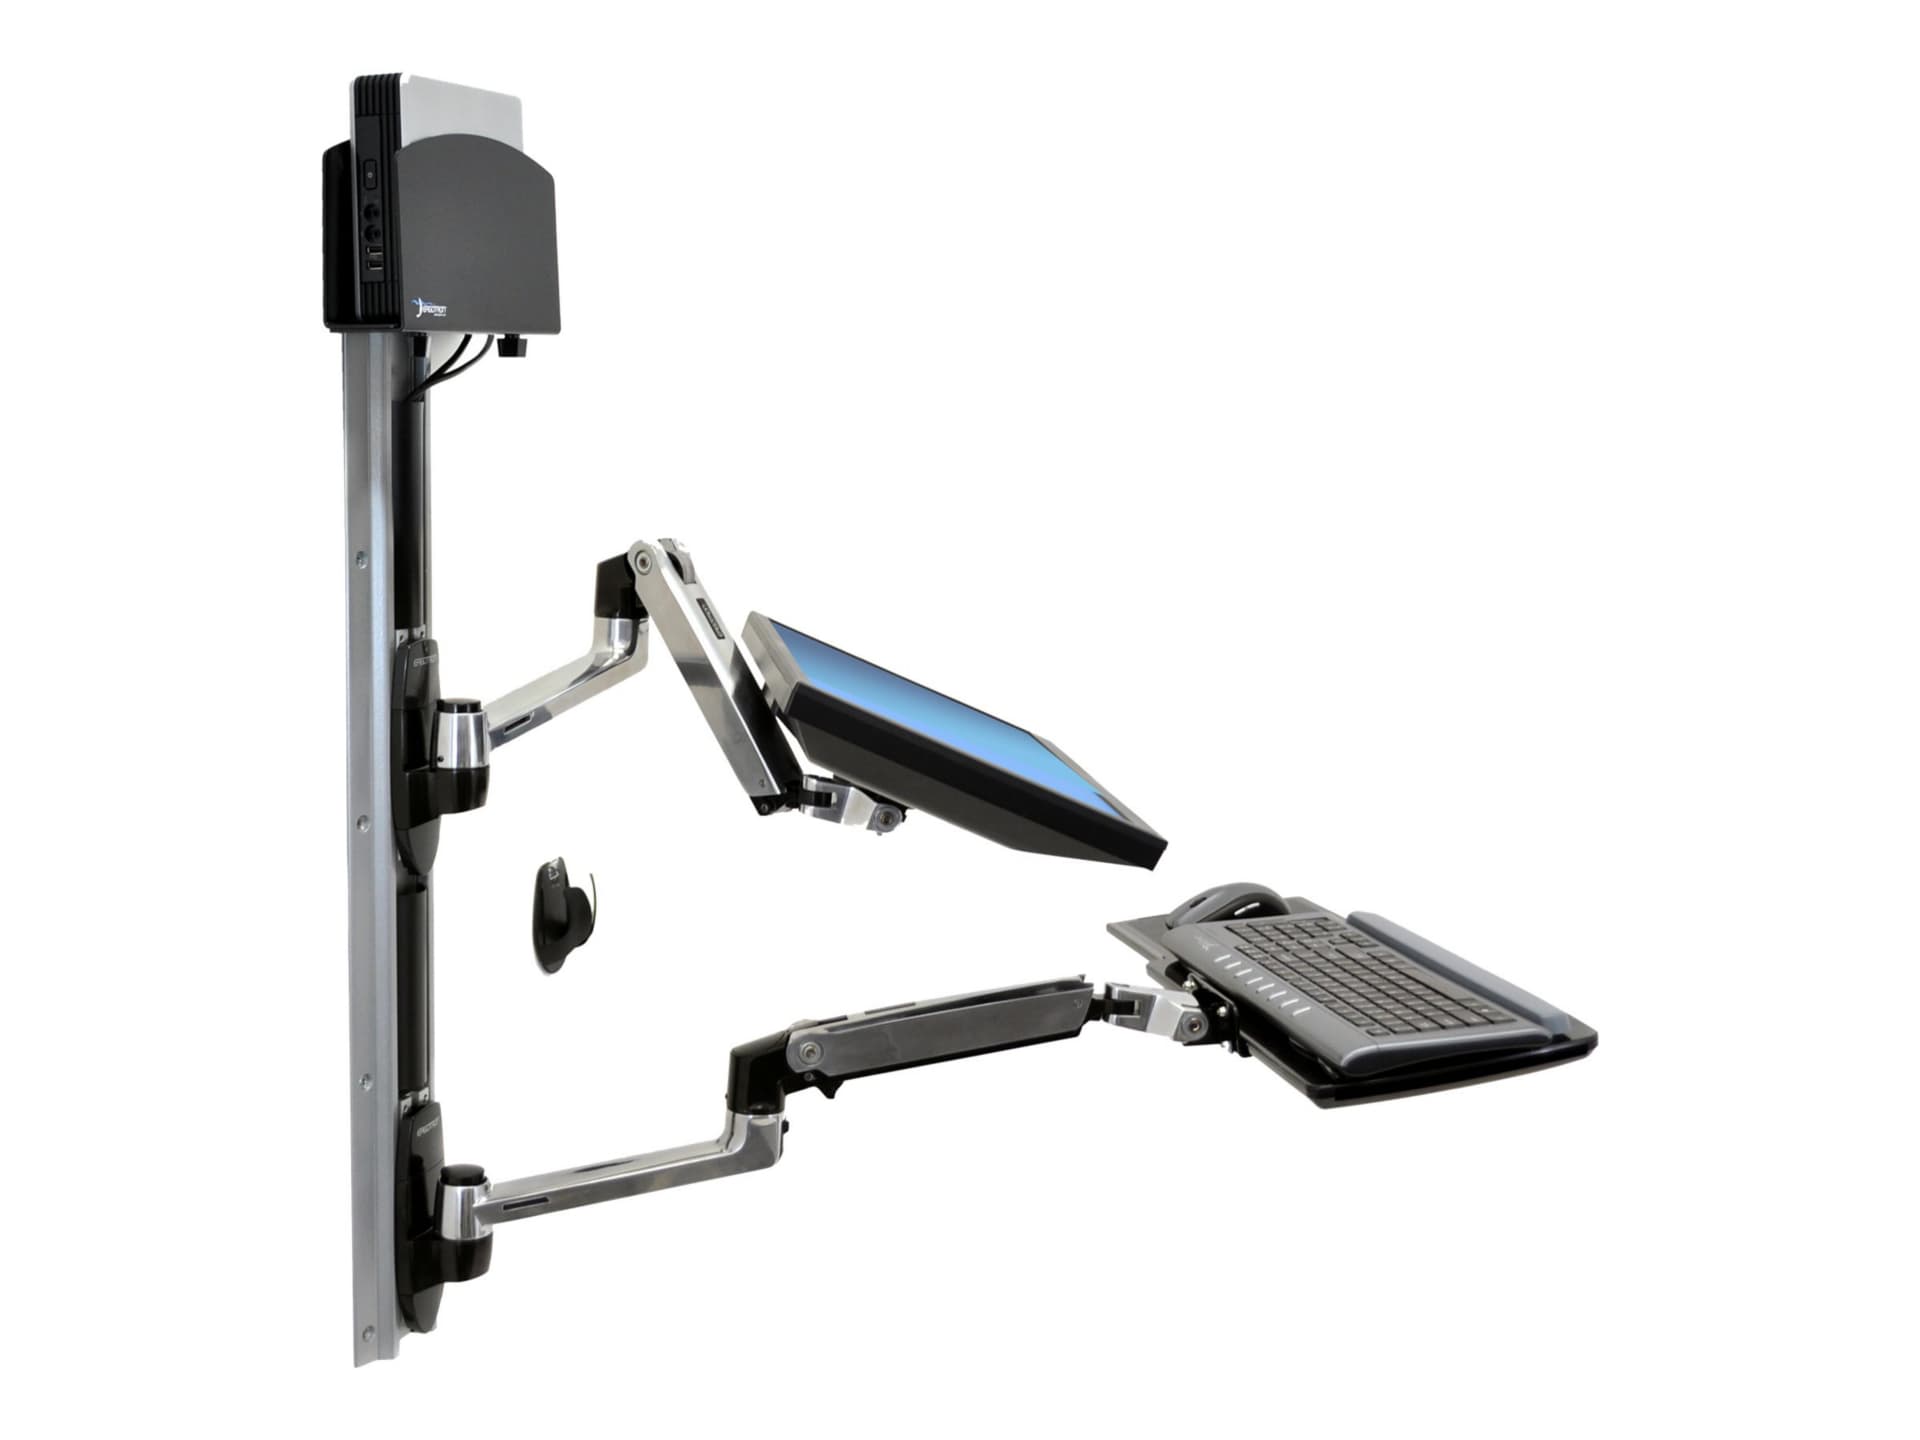 Ergotron LX mounting kit - for LCD display / keyboard / mouse / CPU - small CPU holder - black, polished aluminum